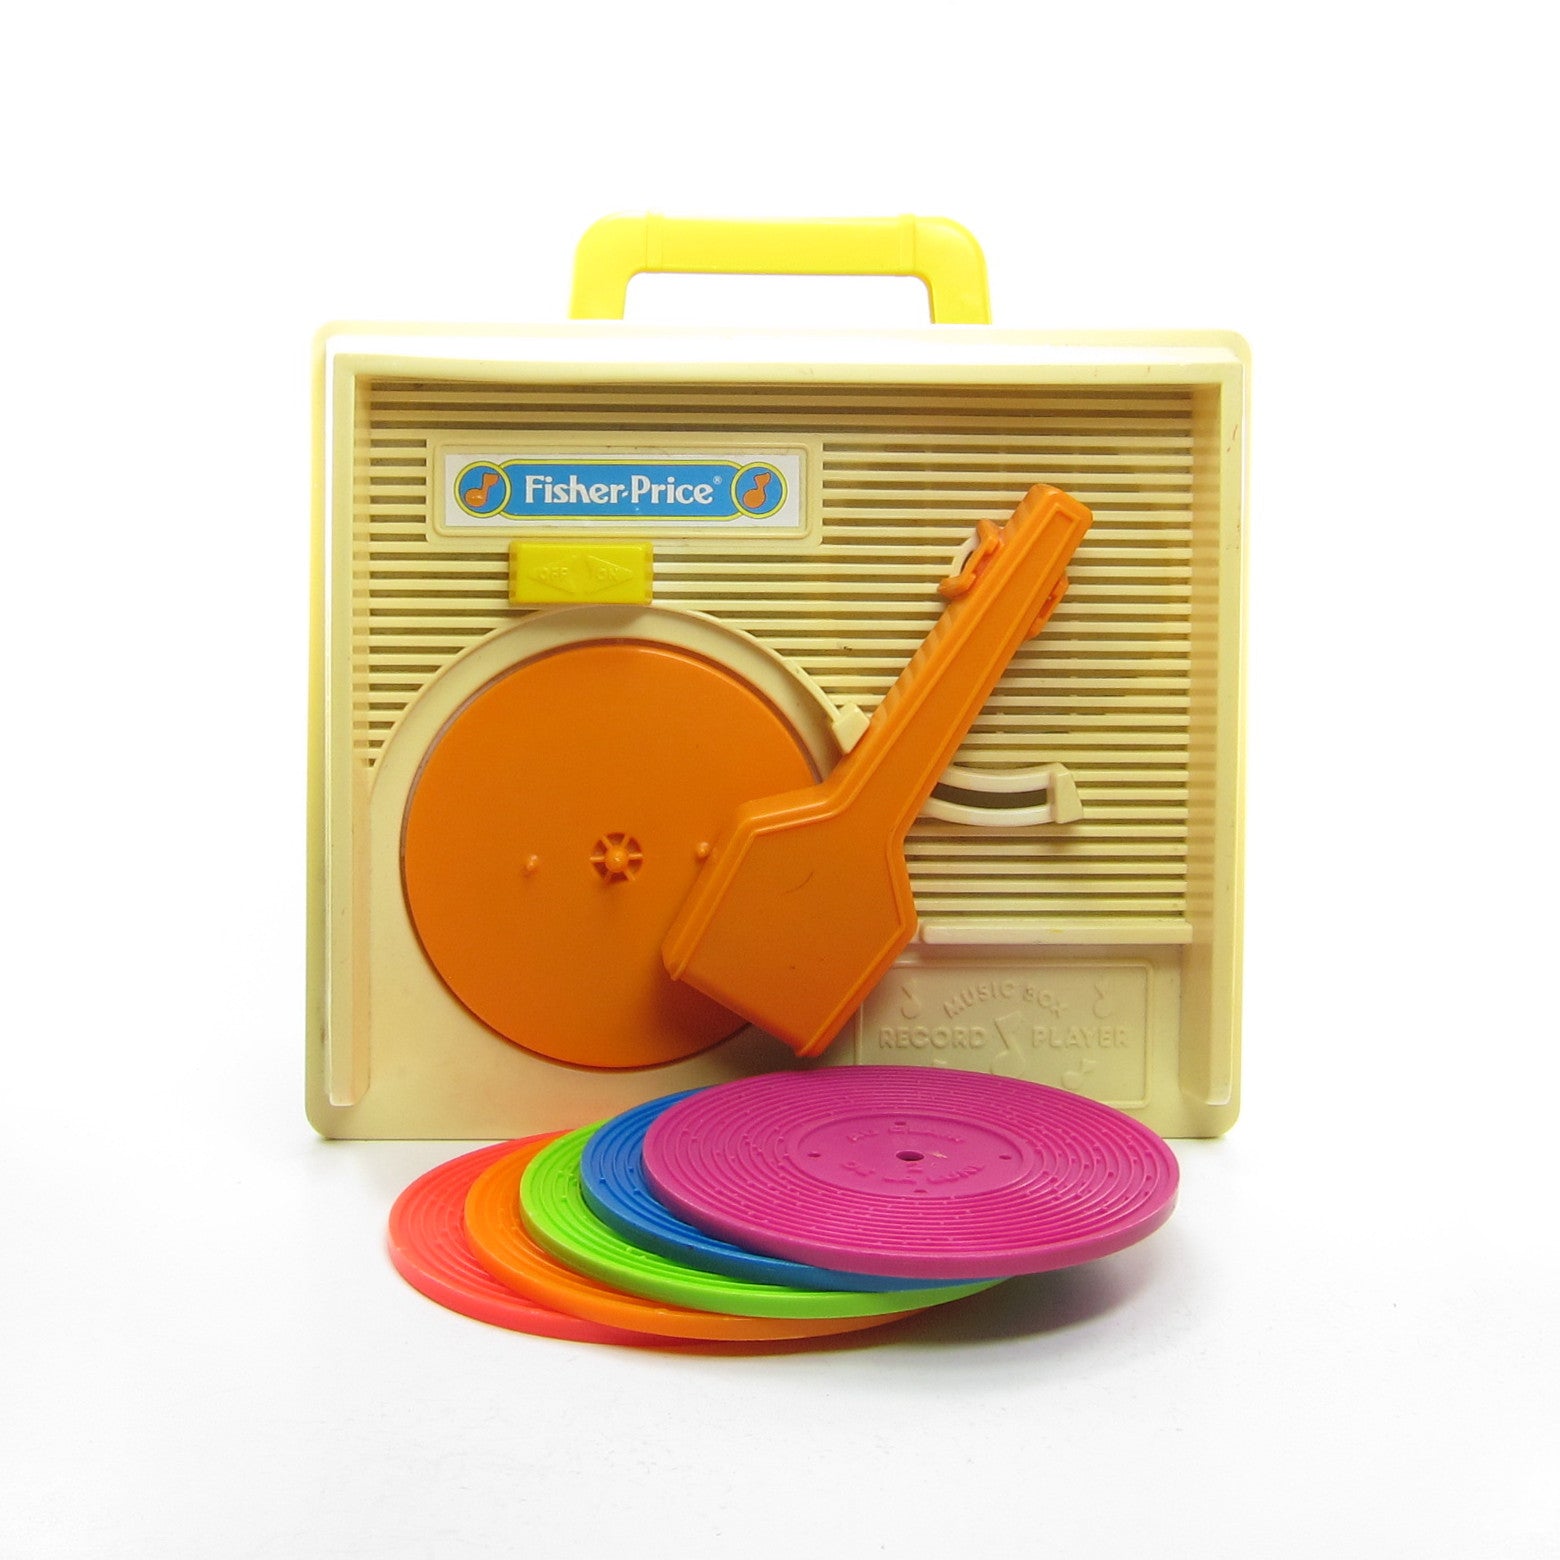 fisher price record player